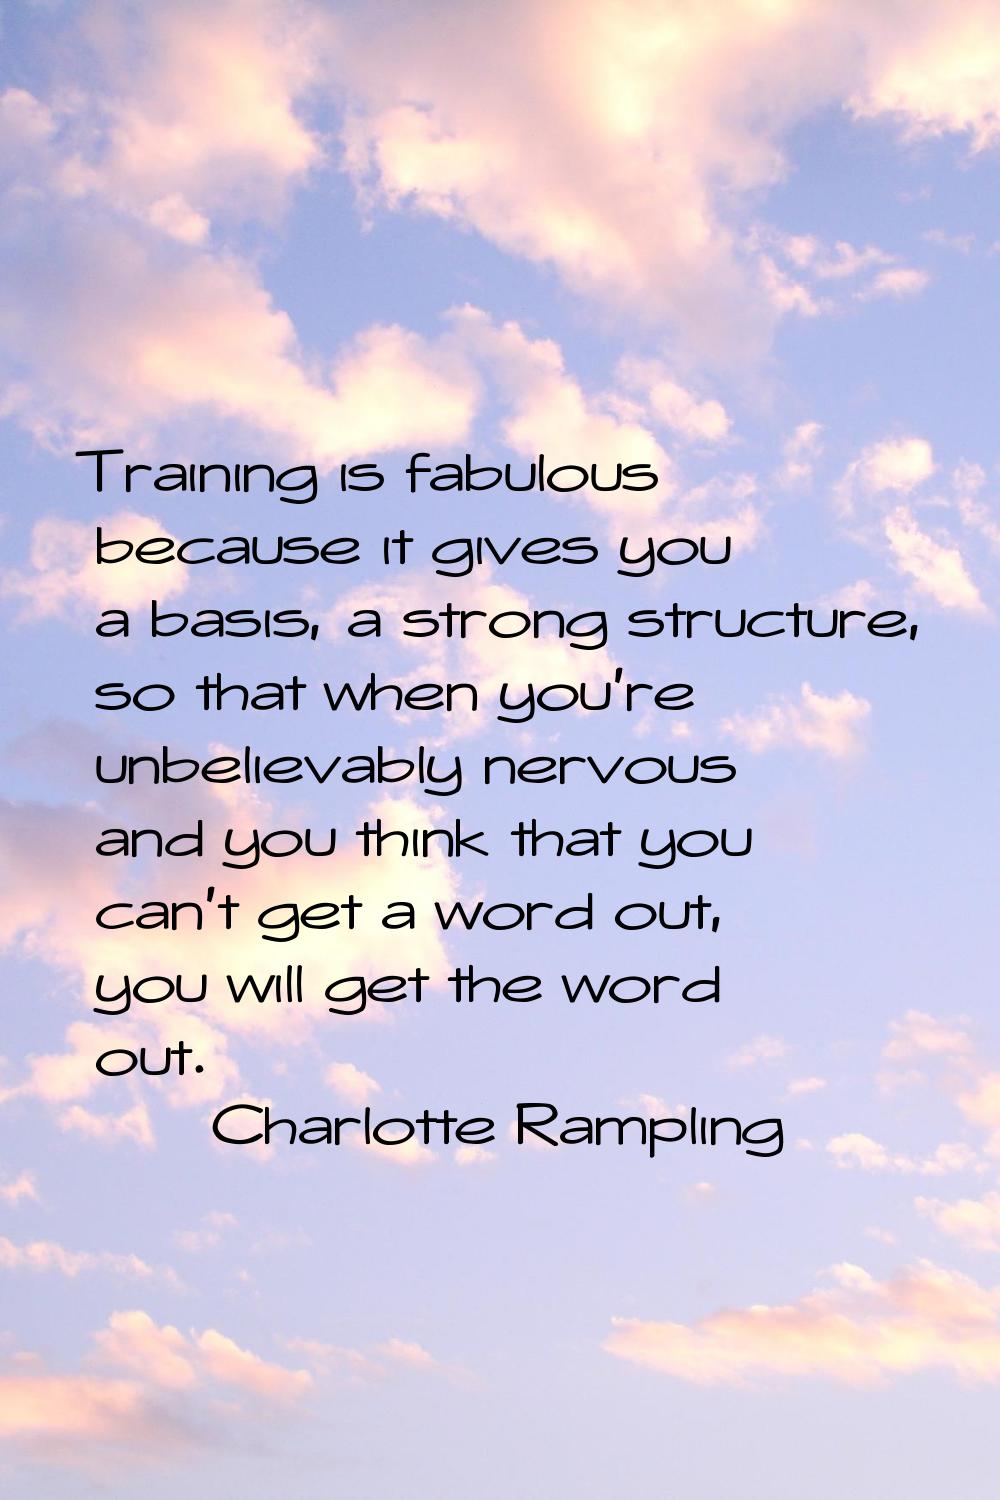 Training is fabulous because it gives you a basis, a strong structure, so that when you're unbeliev